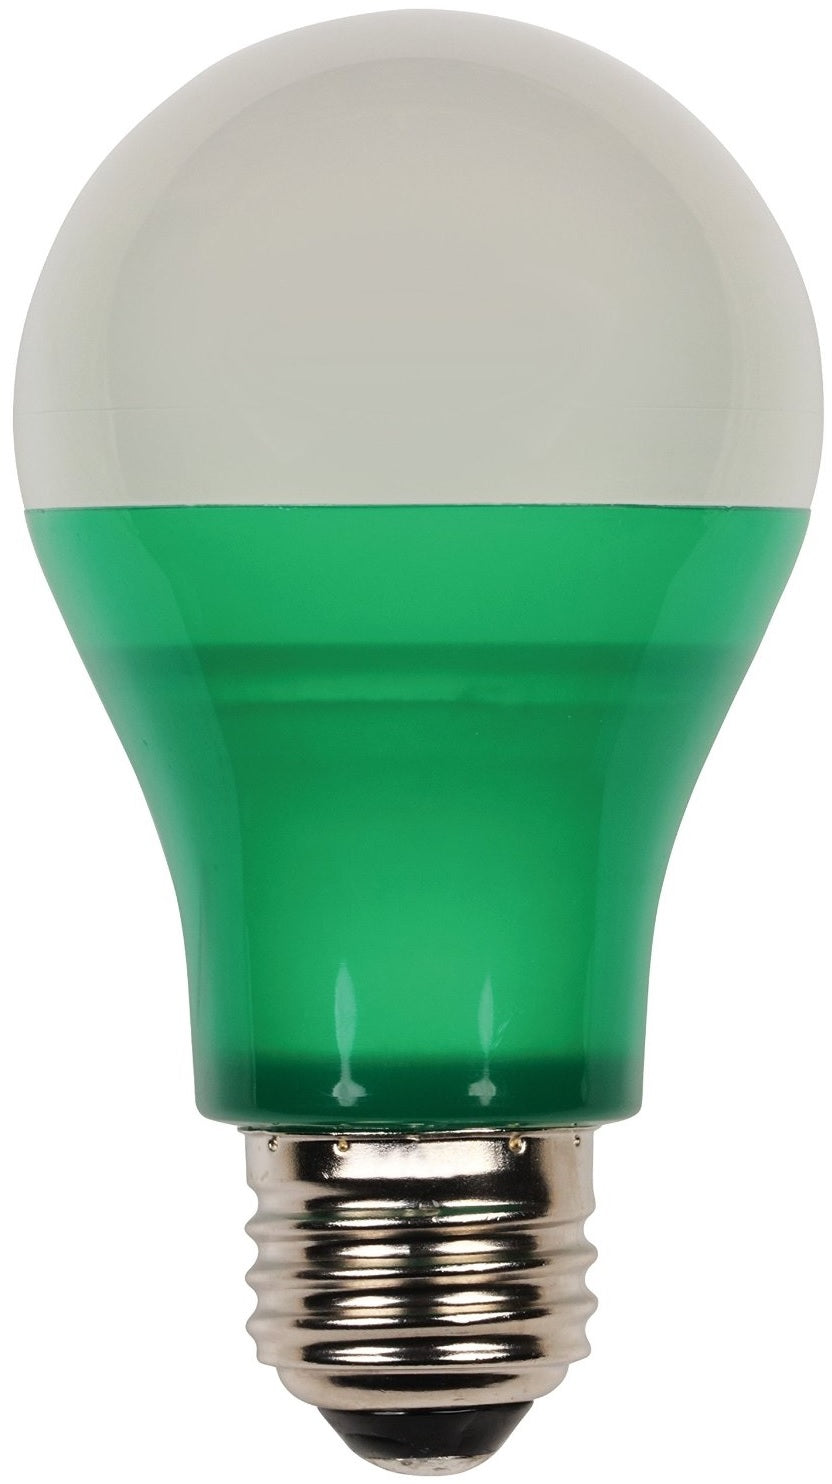 buy colored party light bulbs at cheap rate in bulk. wholesale & retail lamp replacement parts store. home décor ideas, maintenance, repair replacement parts